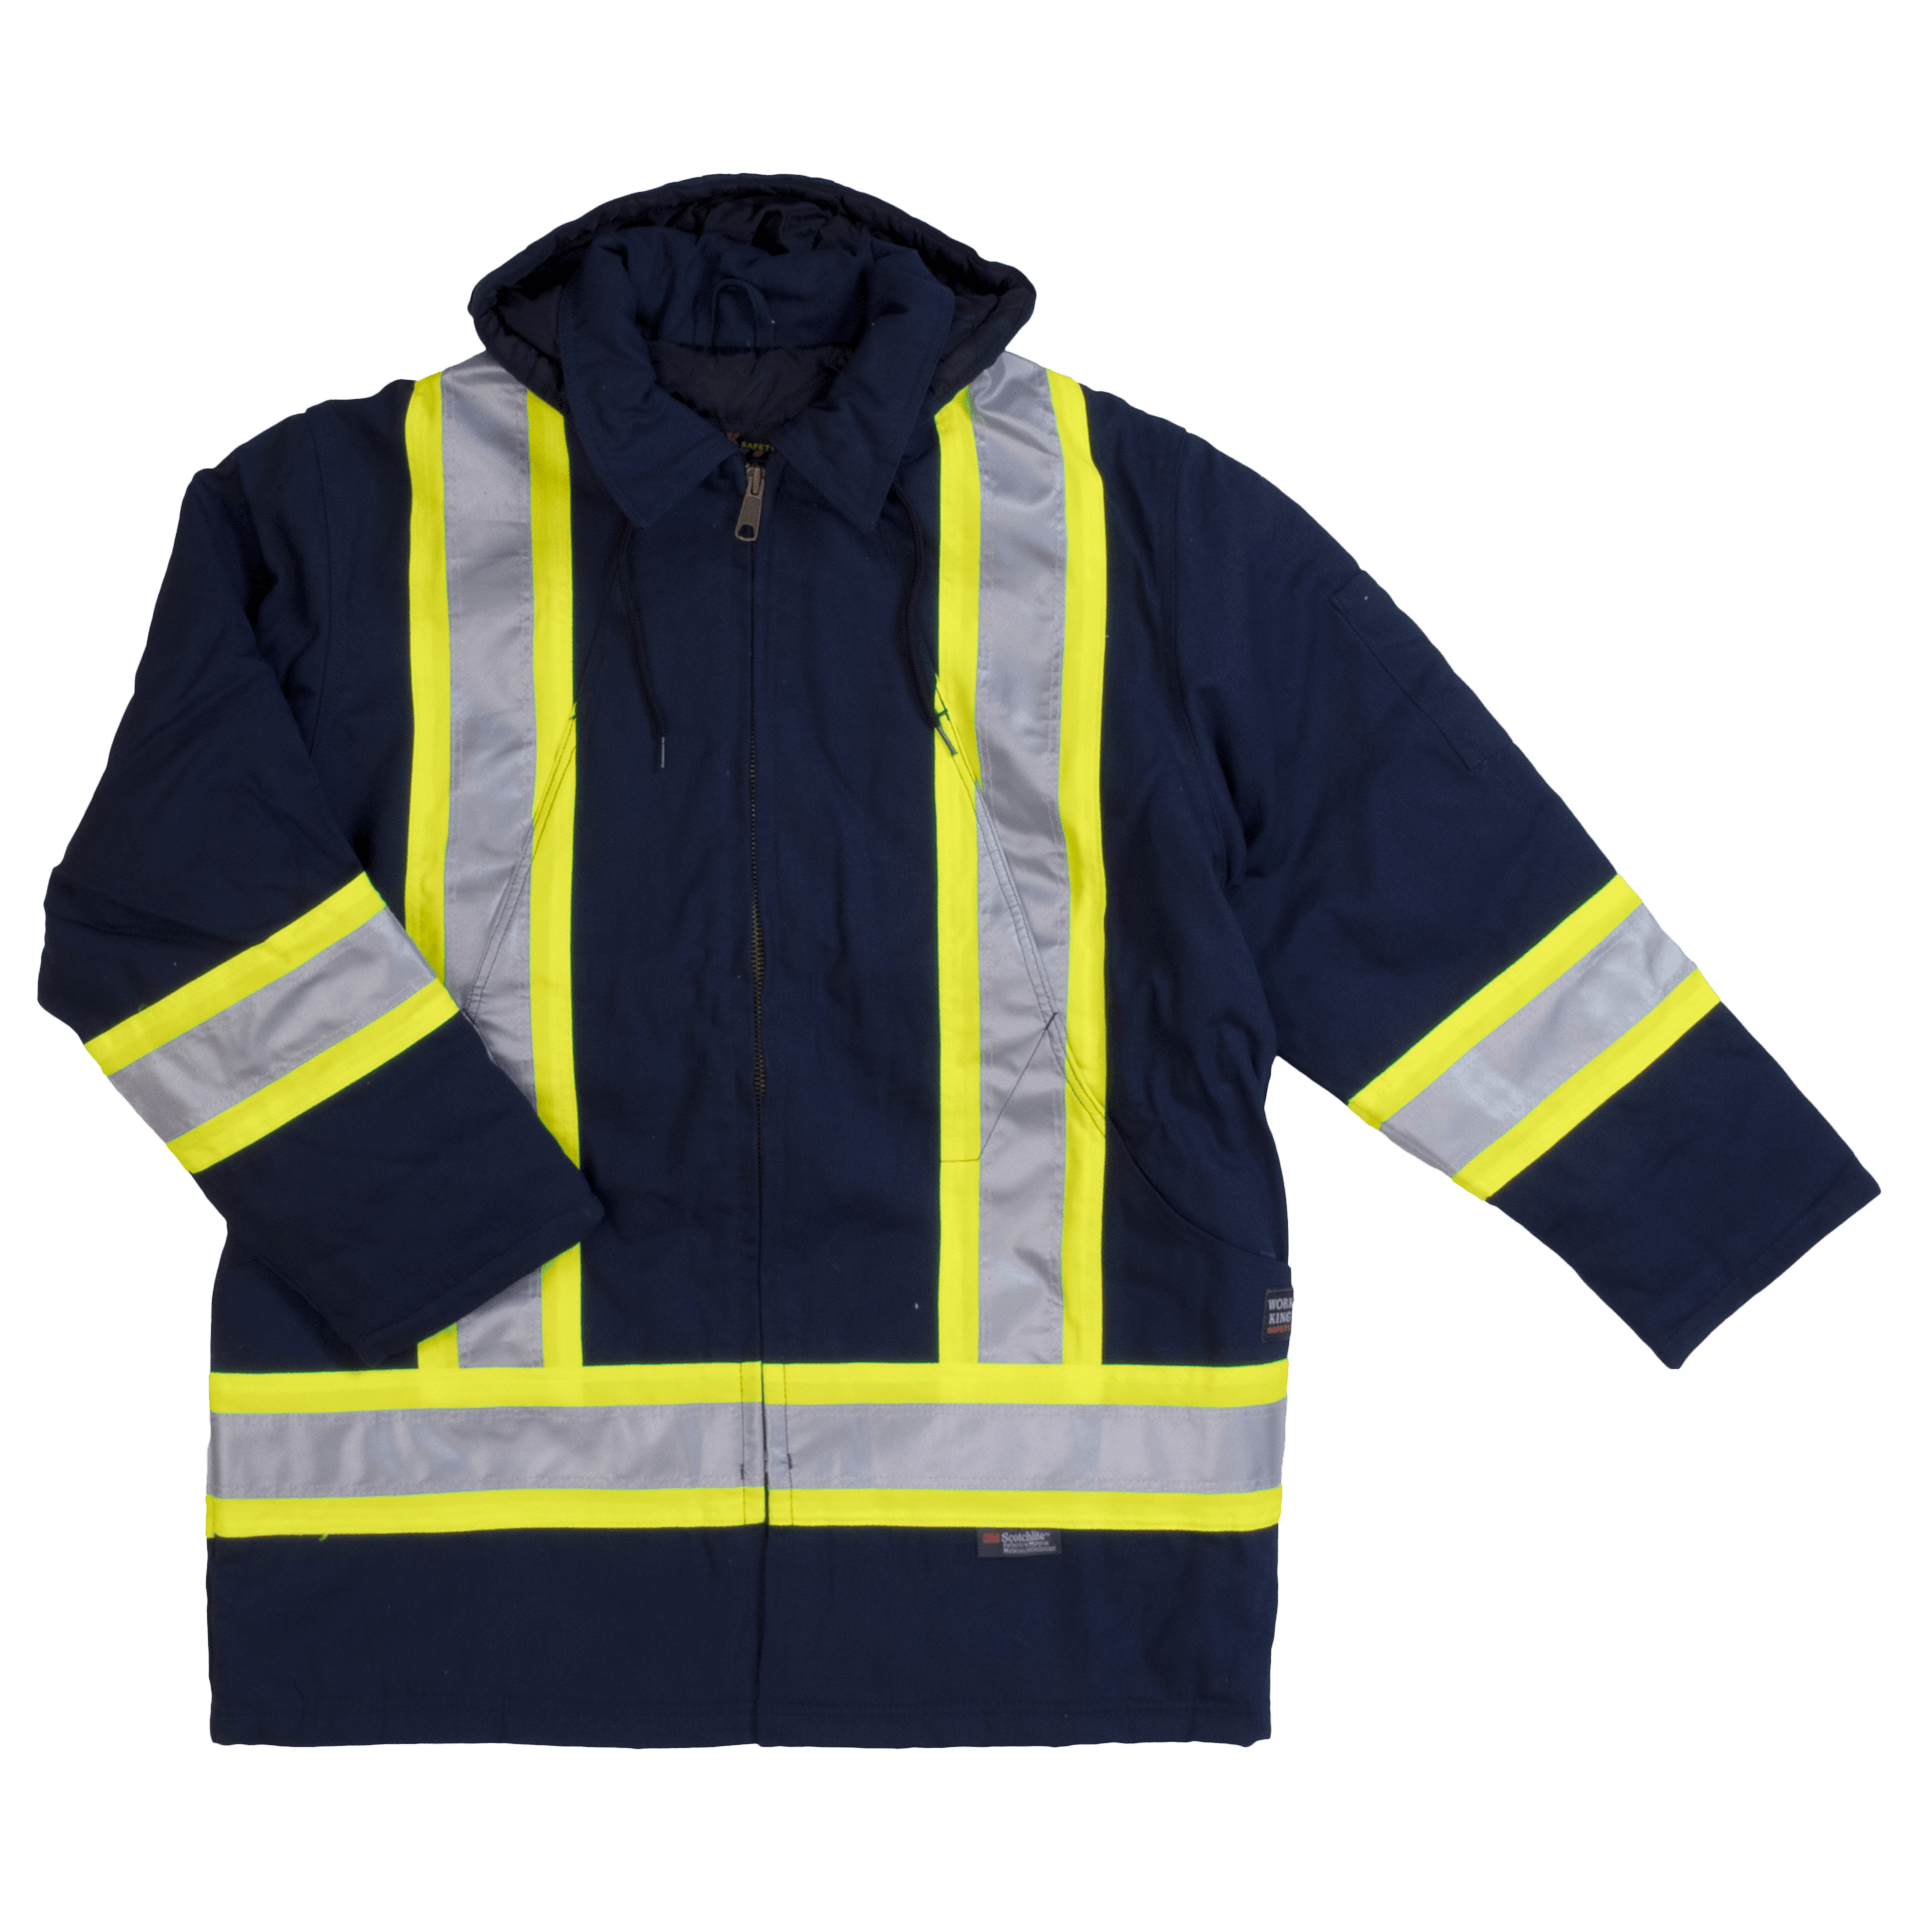 Tough Duck Fleece Lined Safety Jacket - S157 - Navy